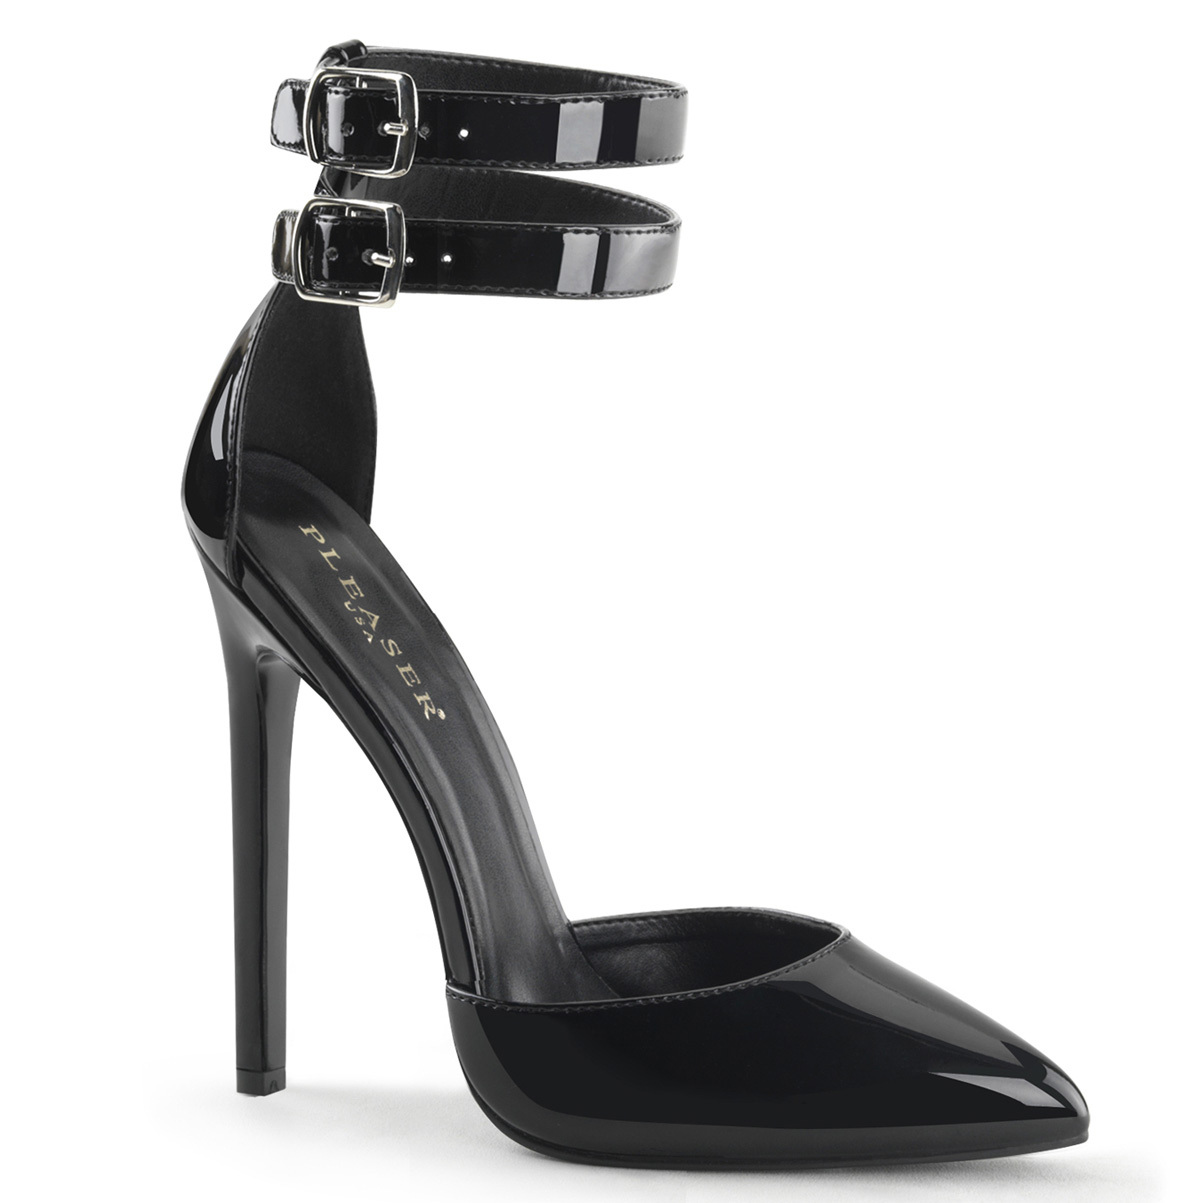 PLEASER Sexy-36 Series 5in Heel d'Orsay Pump - Black Patent - Women's Shoes